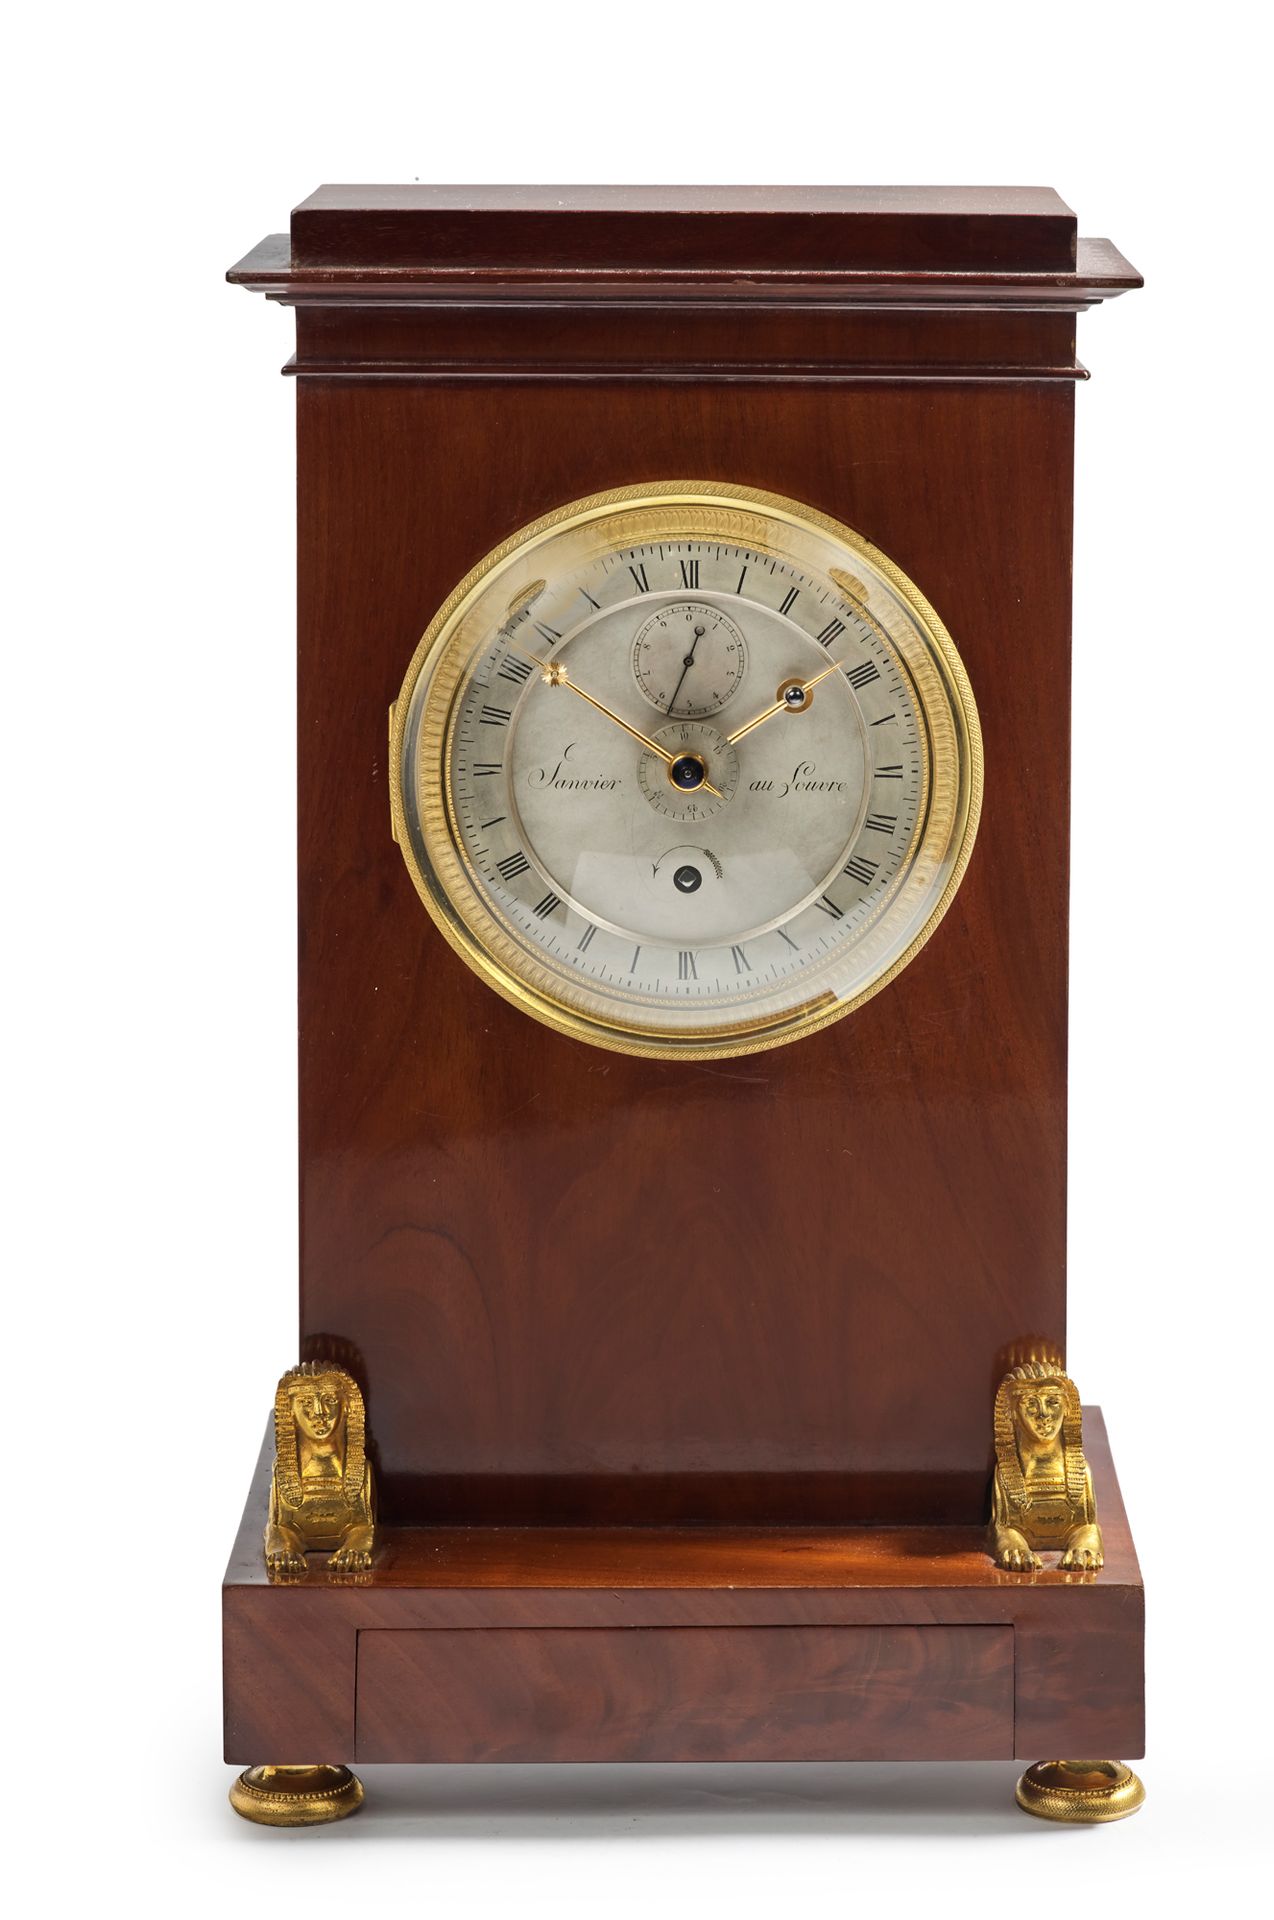 Antide JANVIER (1751-1835) au Louvre 
Large astronomical table clock with 24-hou&hellip;